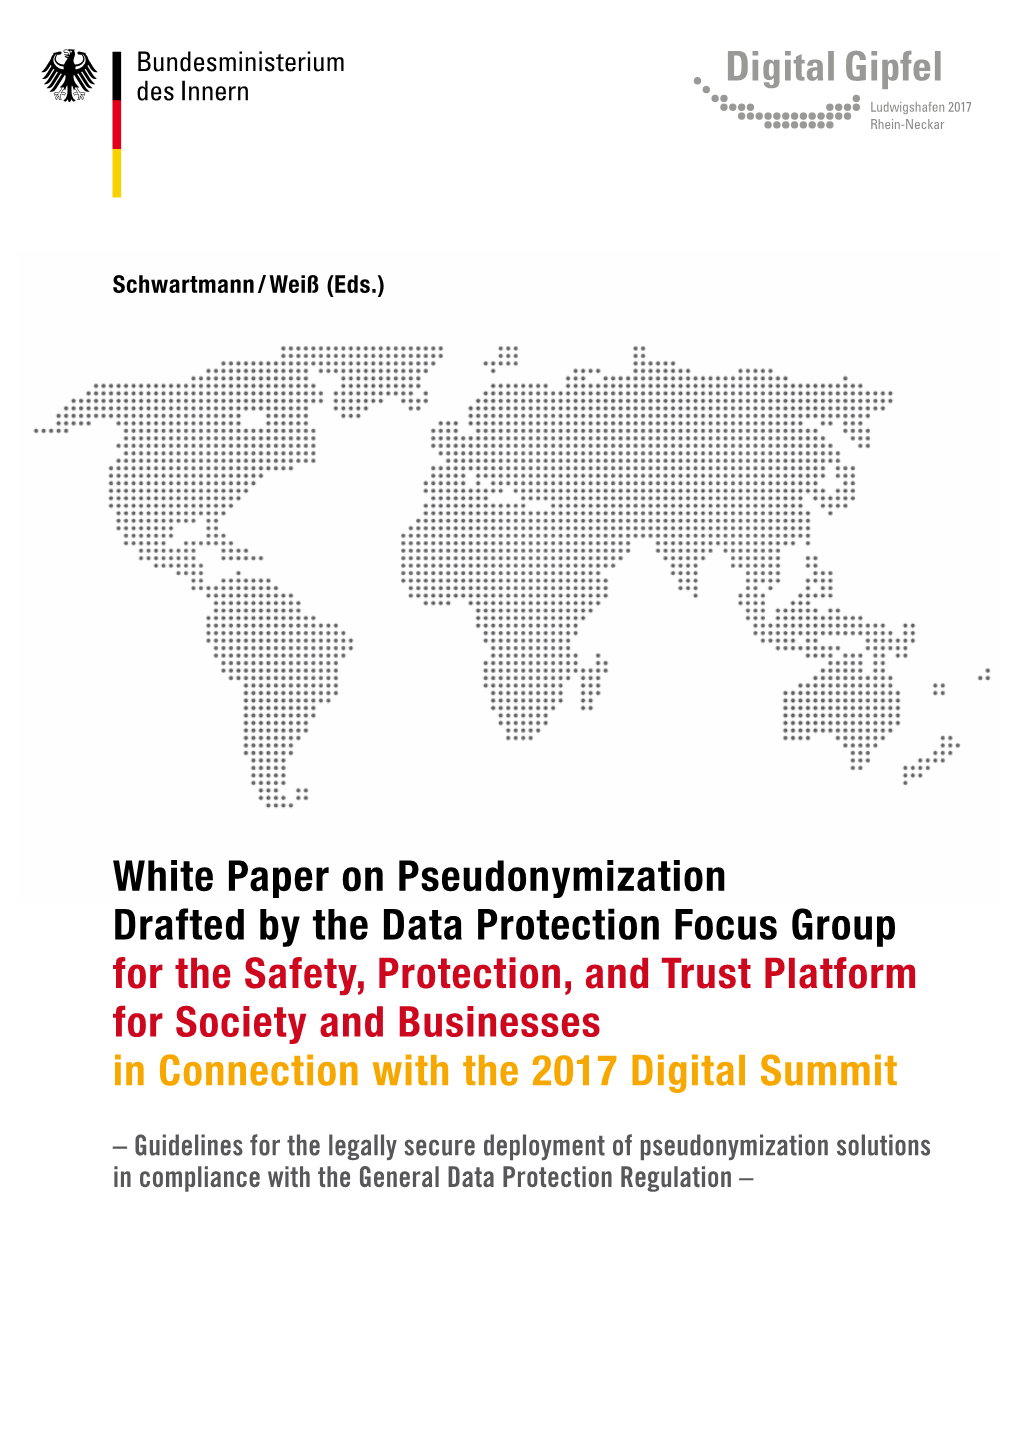 White Paper on Pseudonymization Drafted by the Data Protection